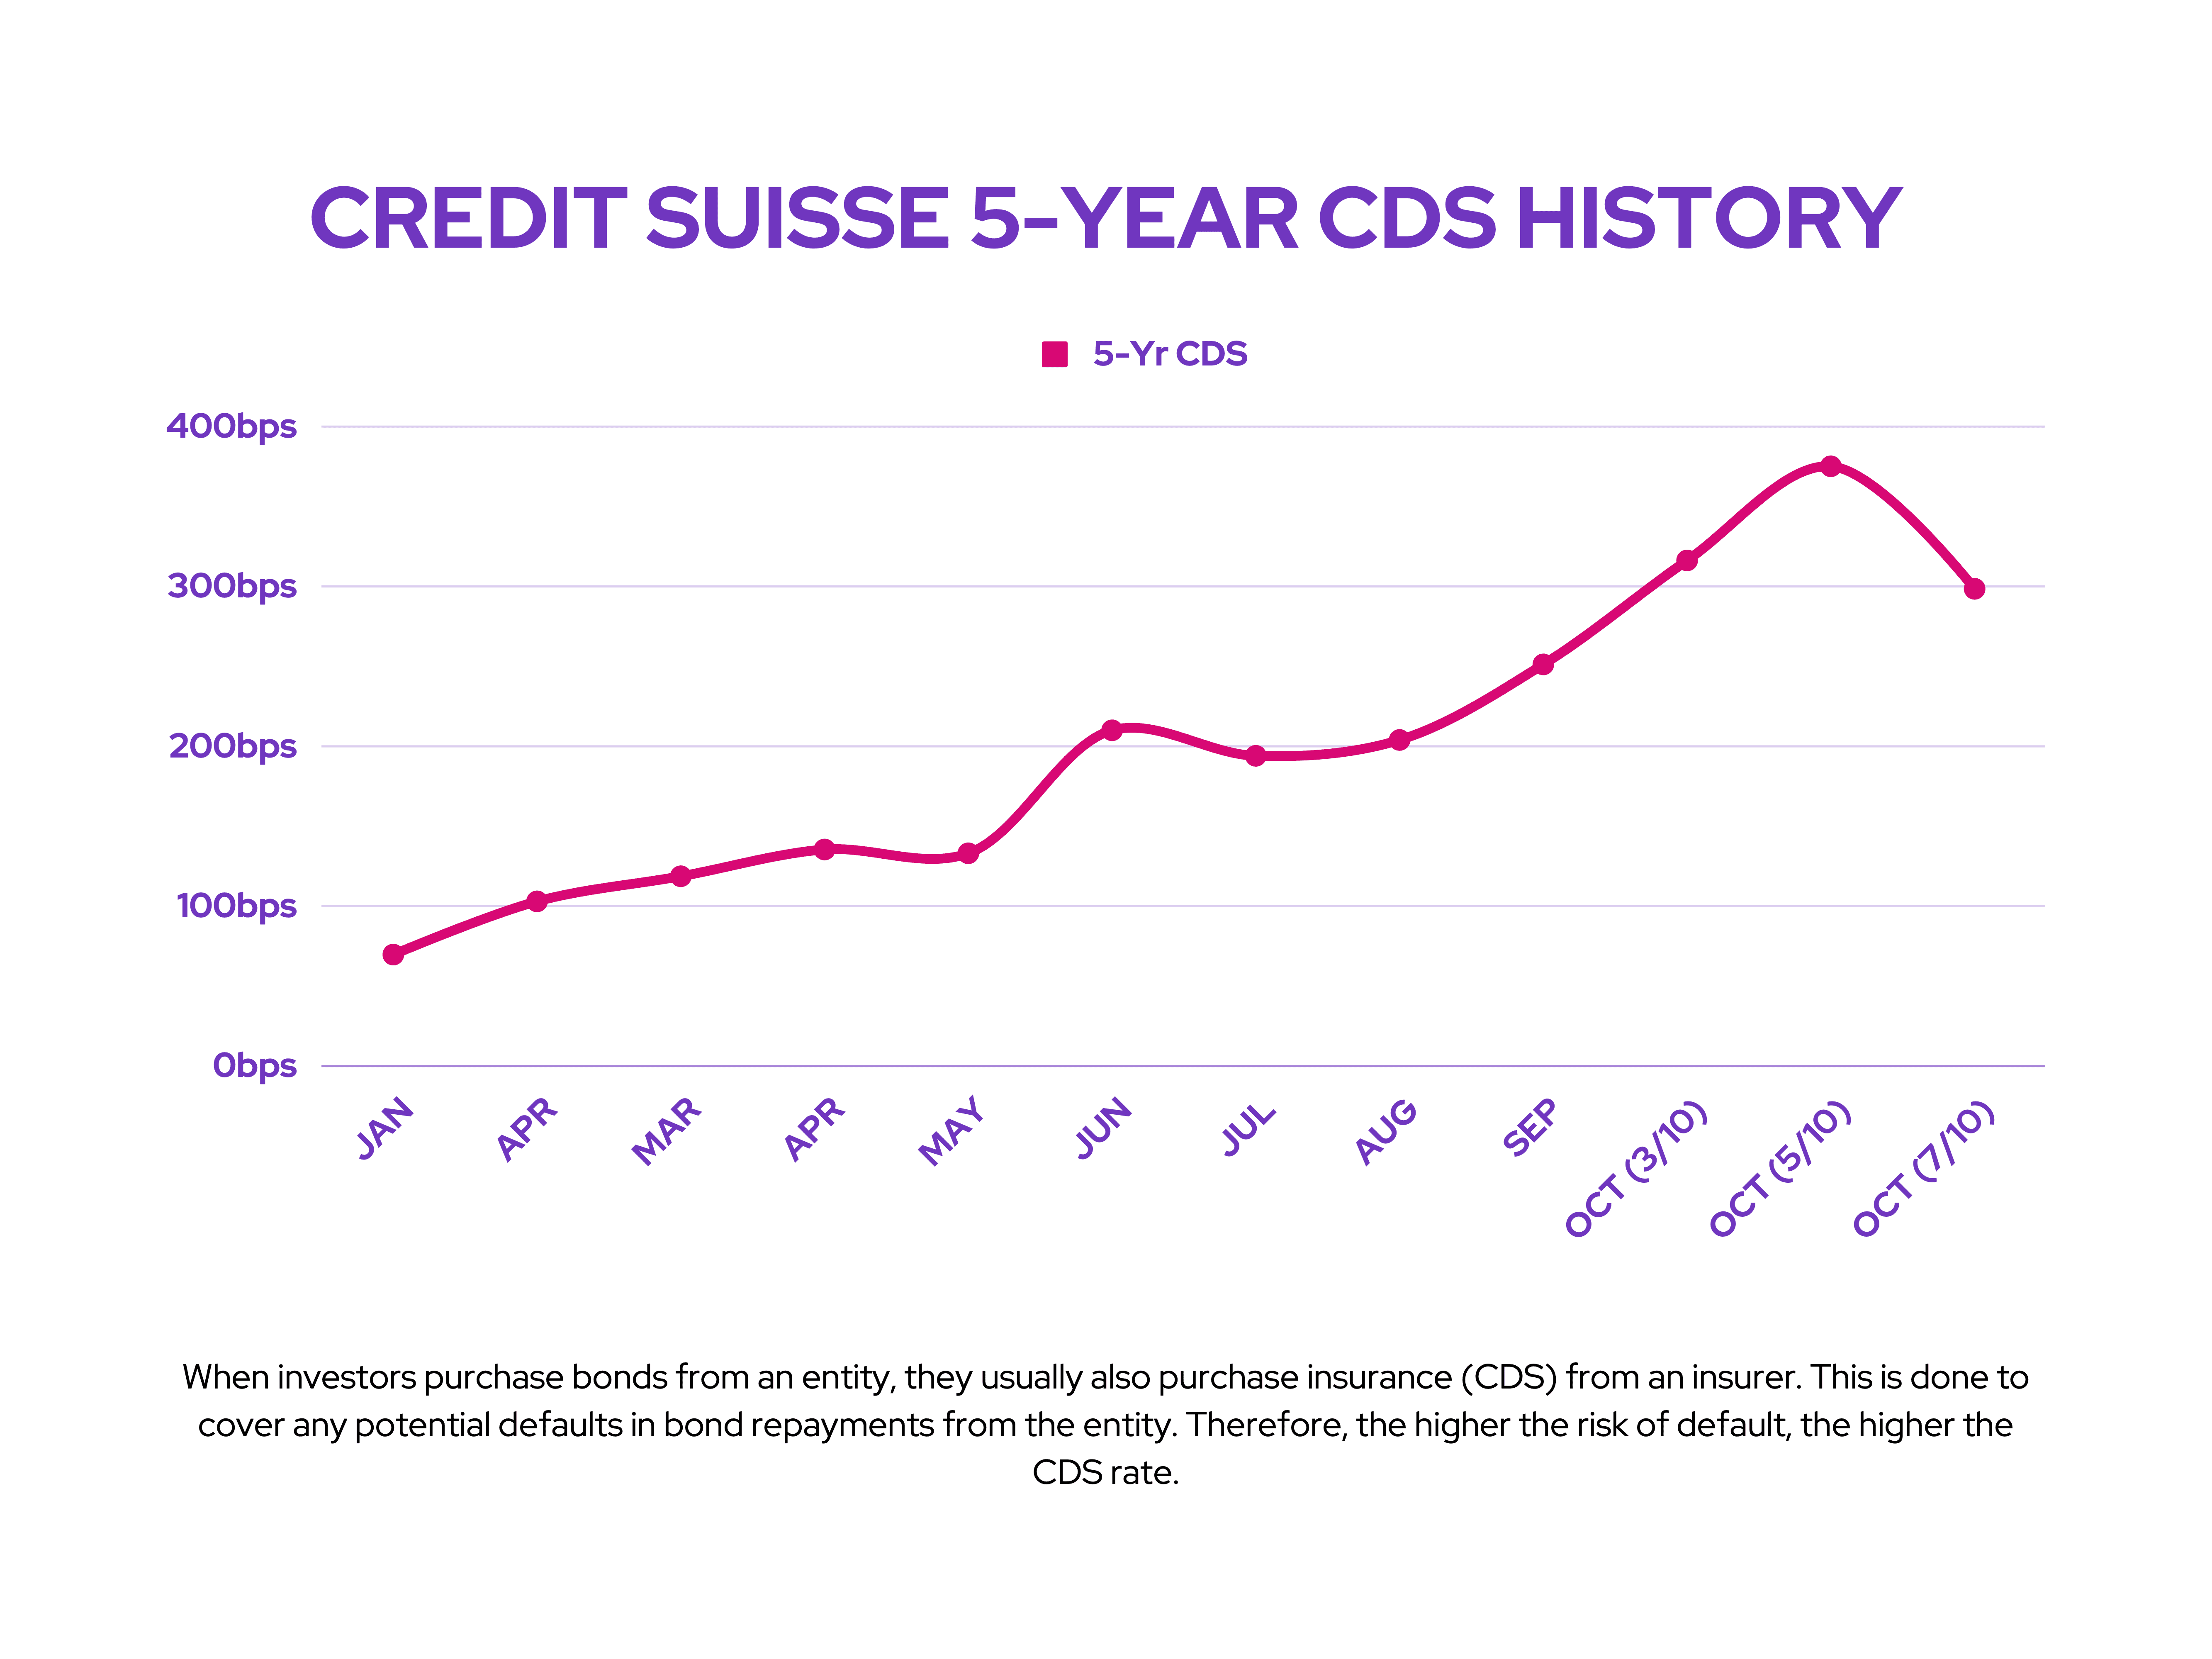 Credit Suisse: 5-Year CDS History